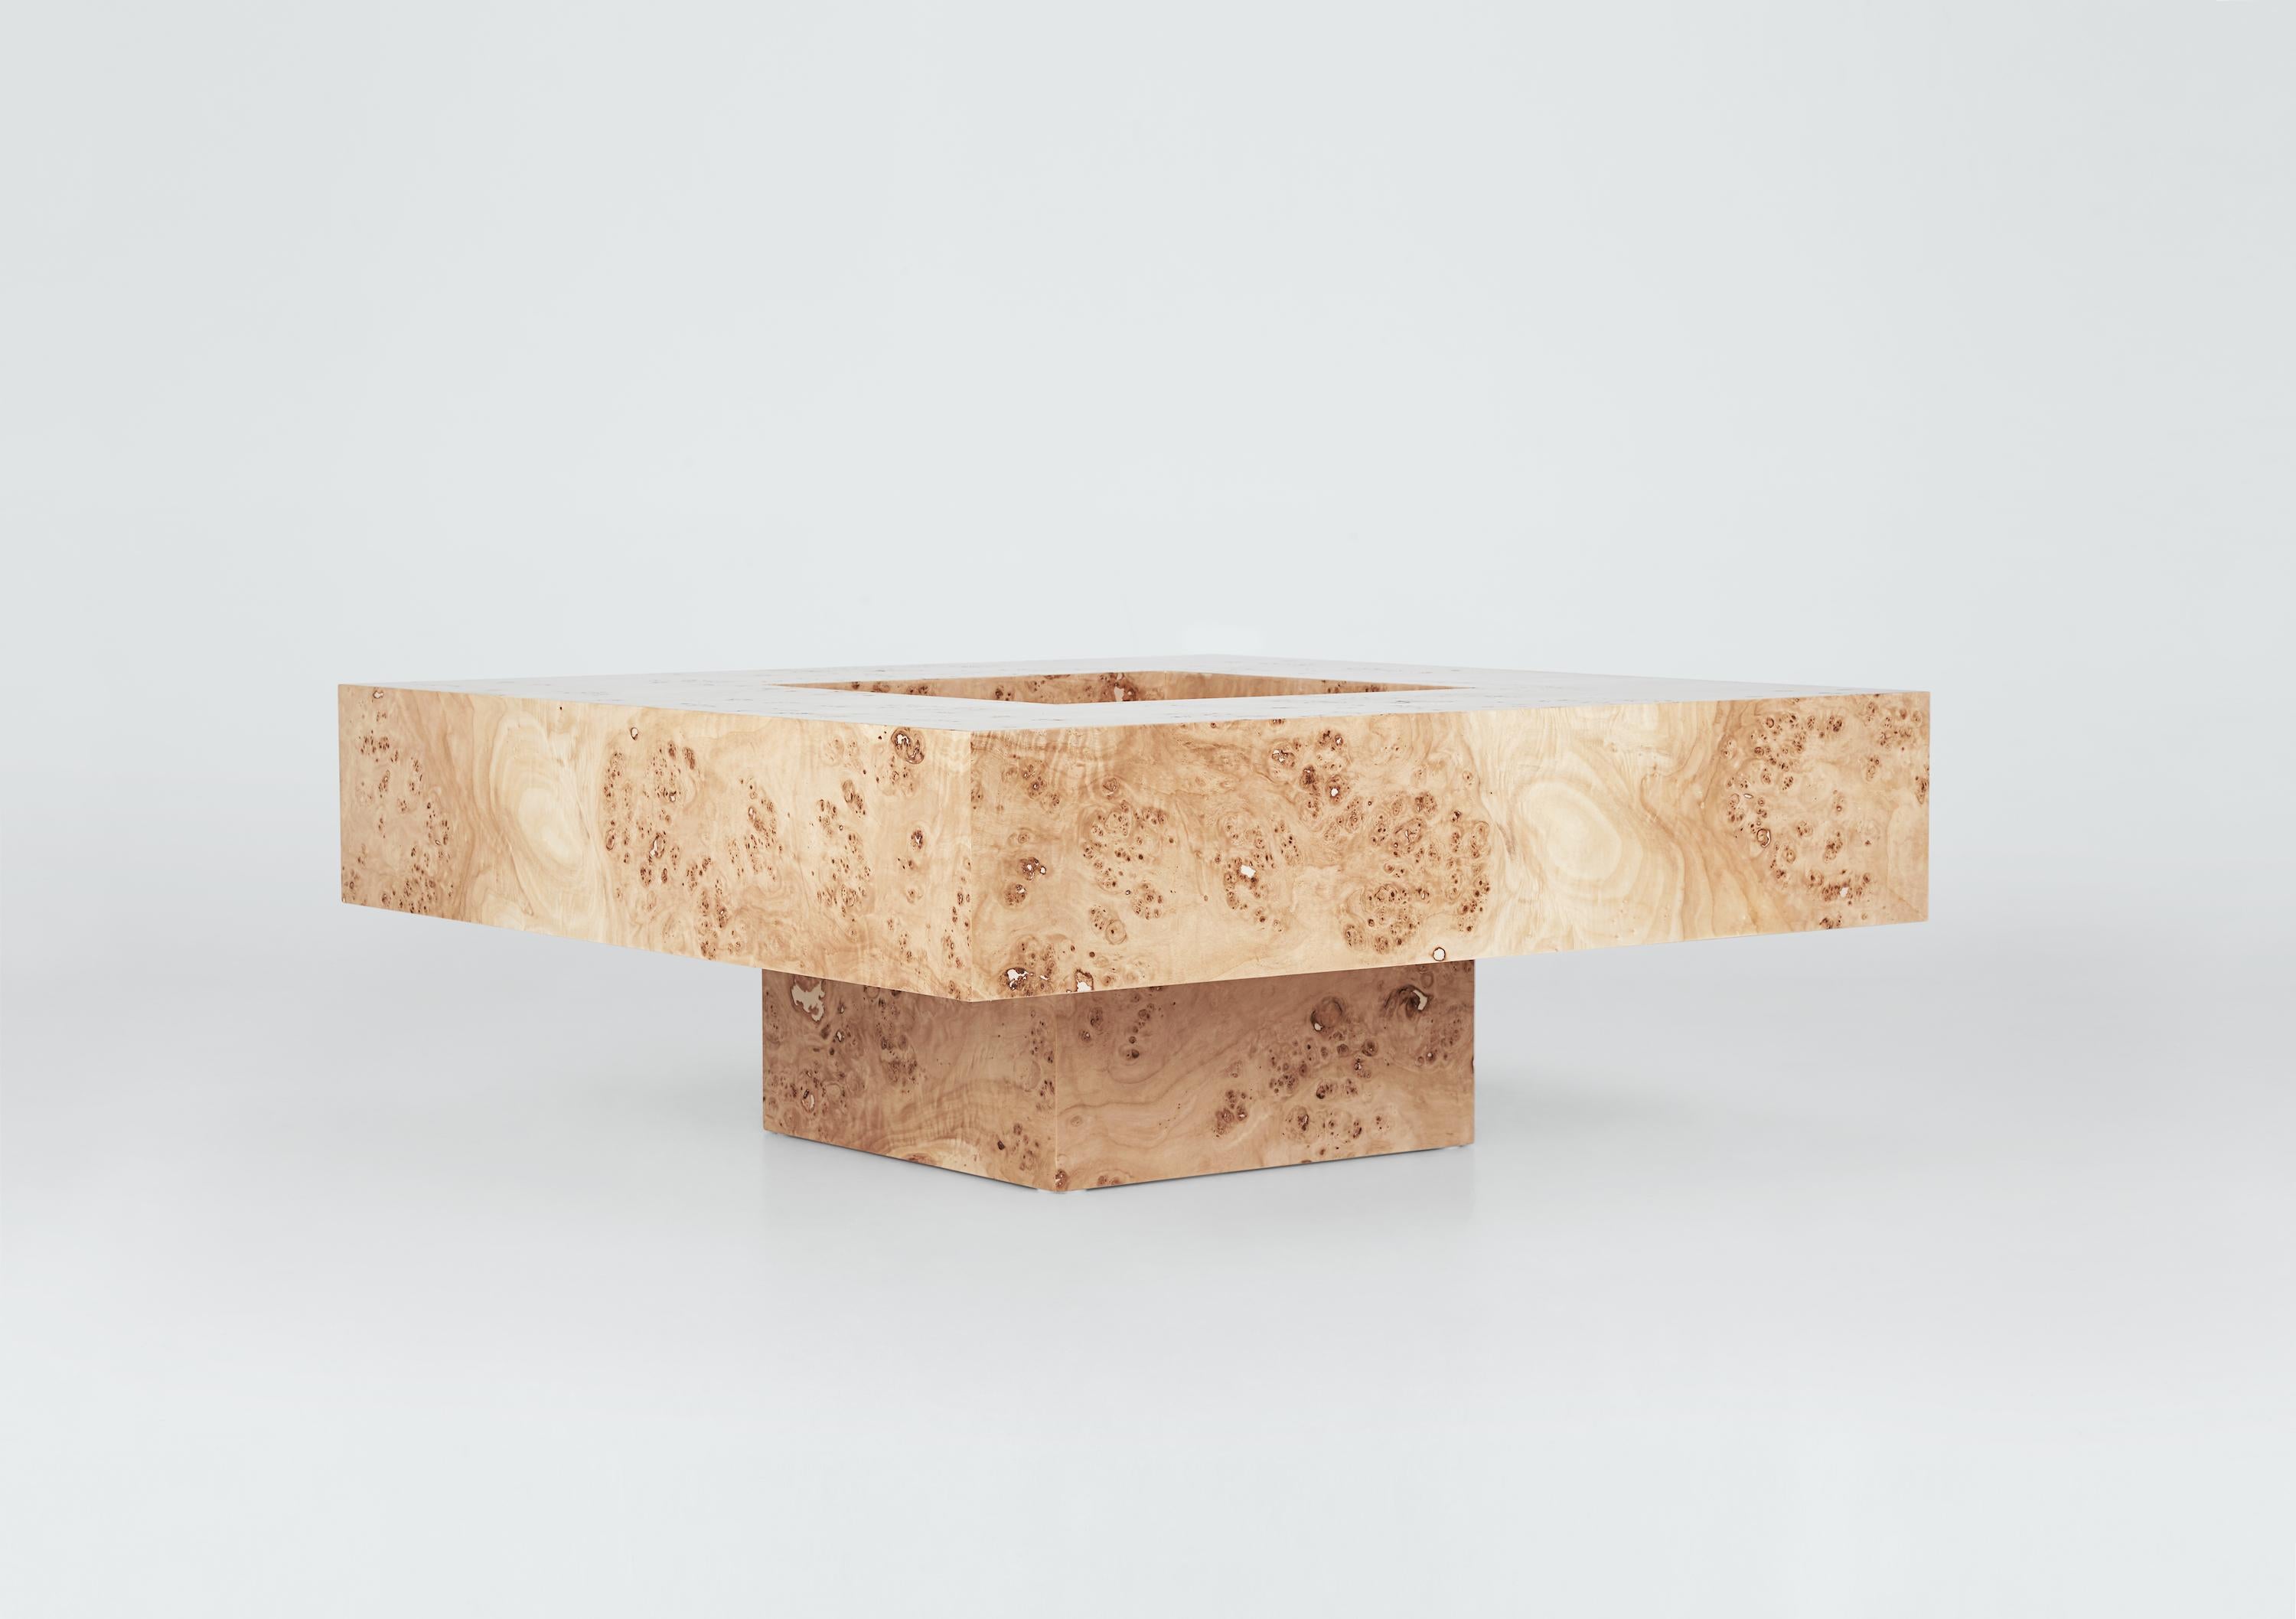 Elevate the ambiance of your home with the exquisite charm of this luxurious poplar burl coffee table. Handcrafted with meticulous precision and care by expert artisans in Portugal, this one-of-a-kind table is a testament to timeless beauty and